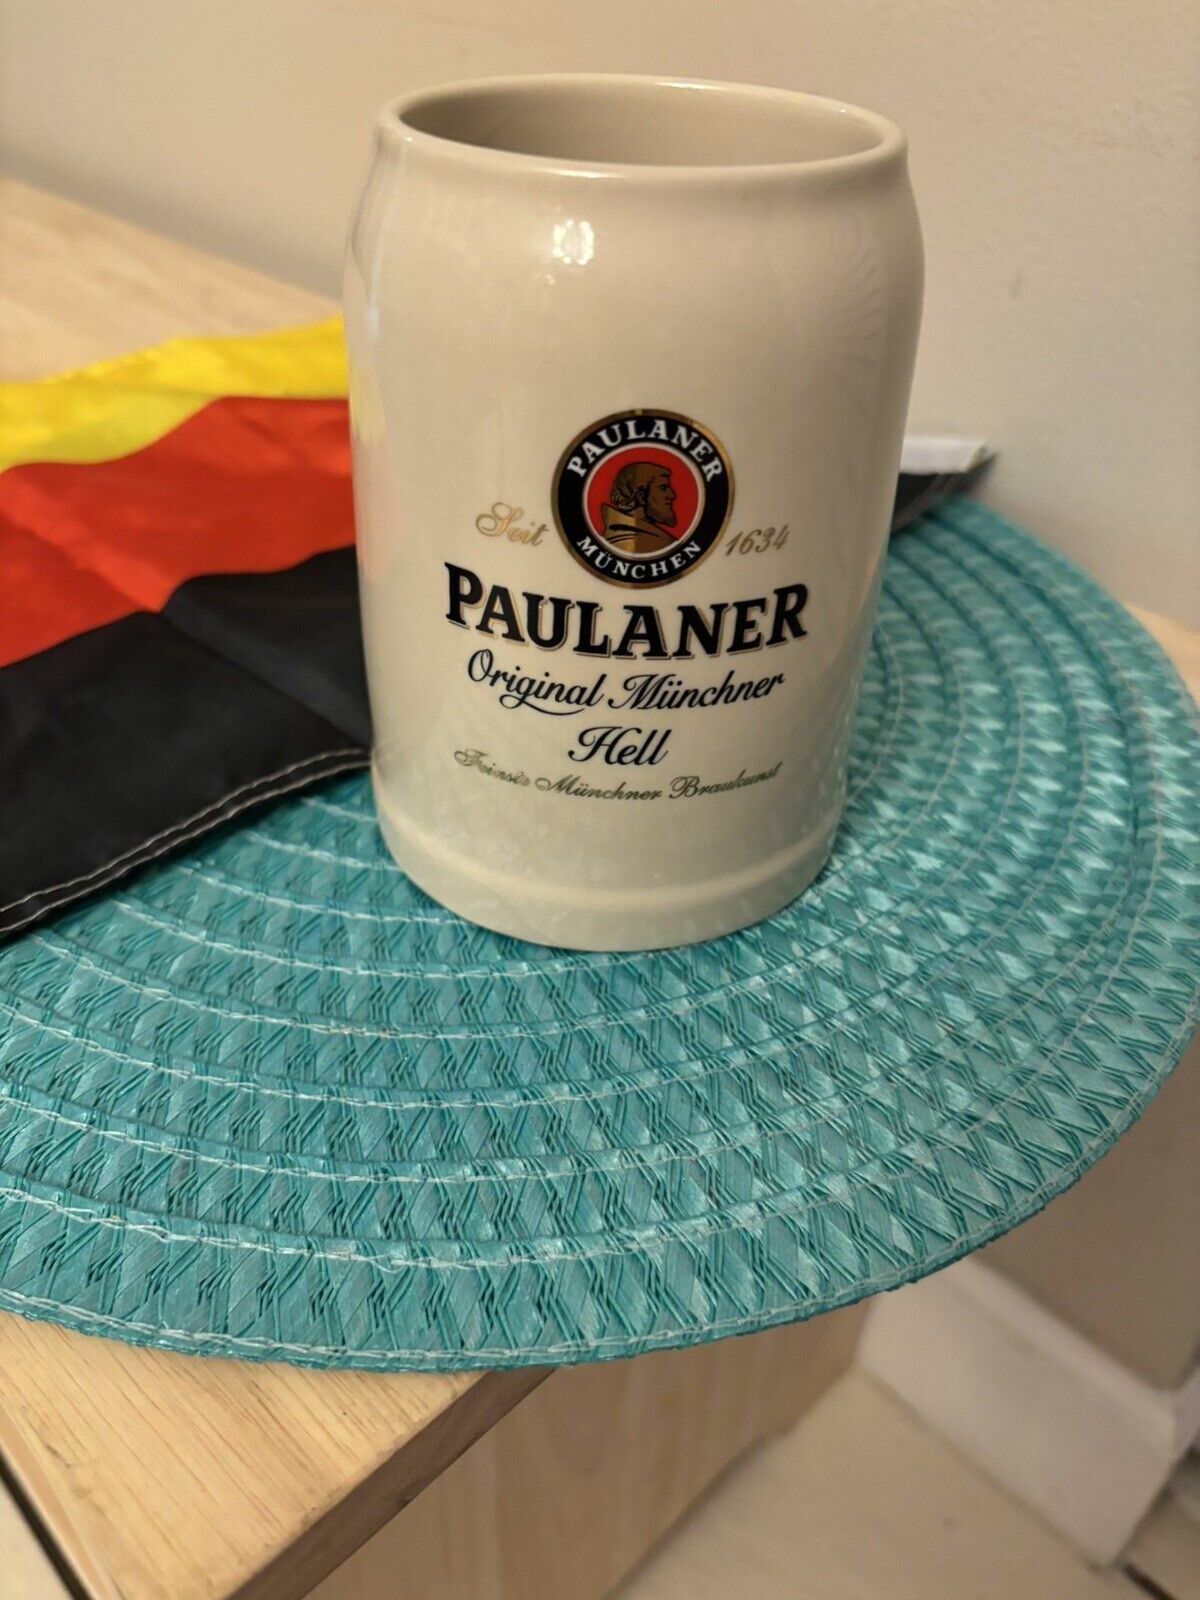 Paulaner munchen mug W/ Unique Handle, Comes With German Flag, 5 Inches Tall.